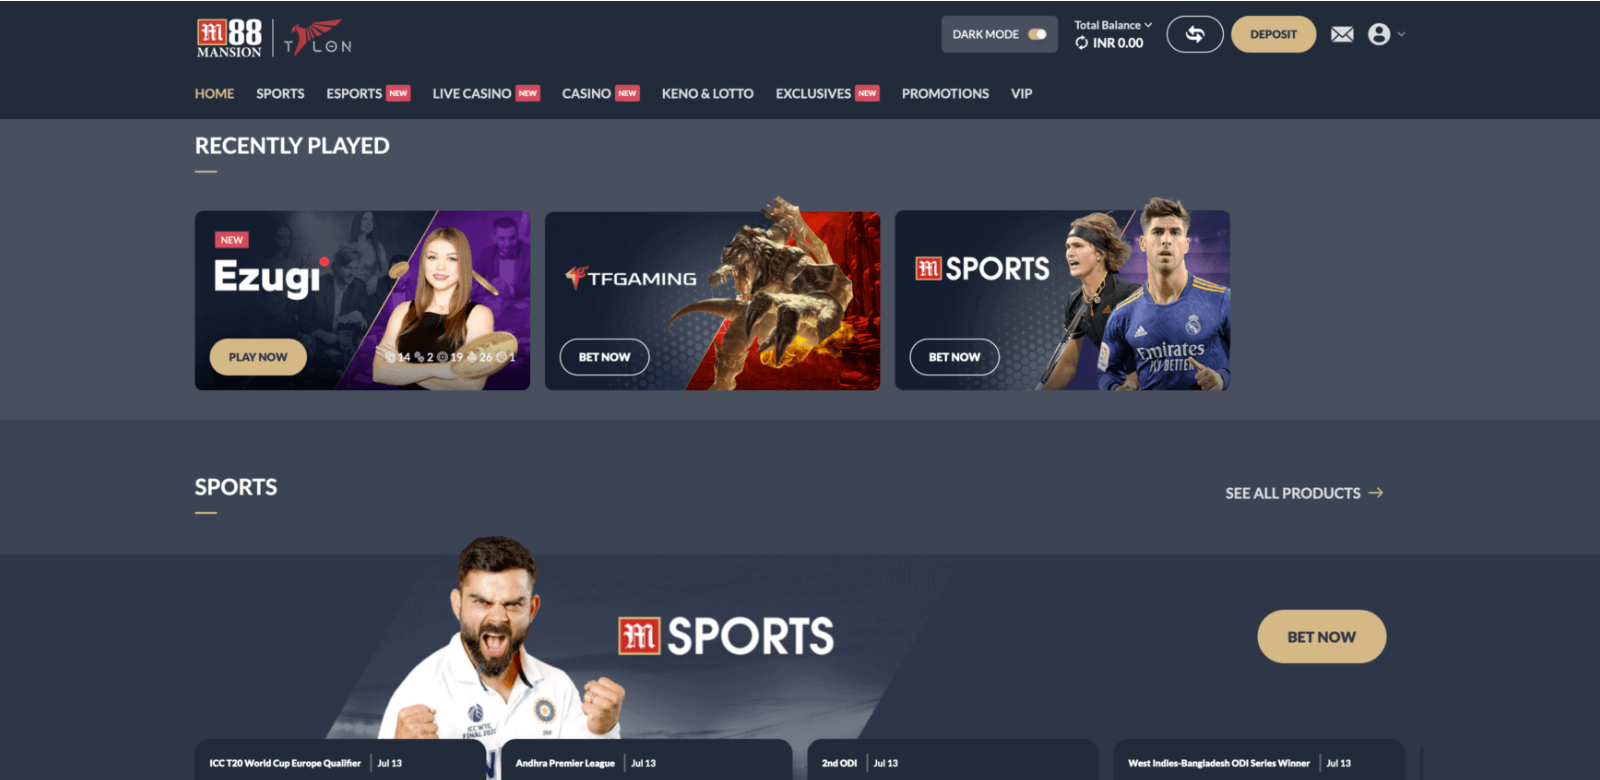 Home page of the official website of the M88 betting company